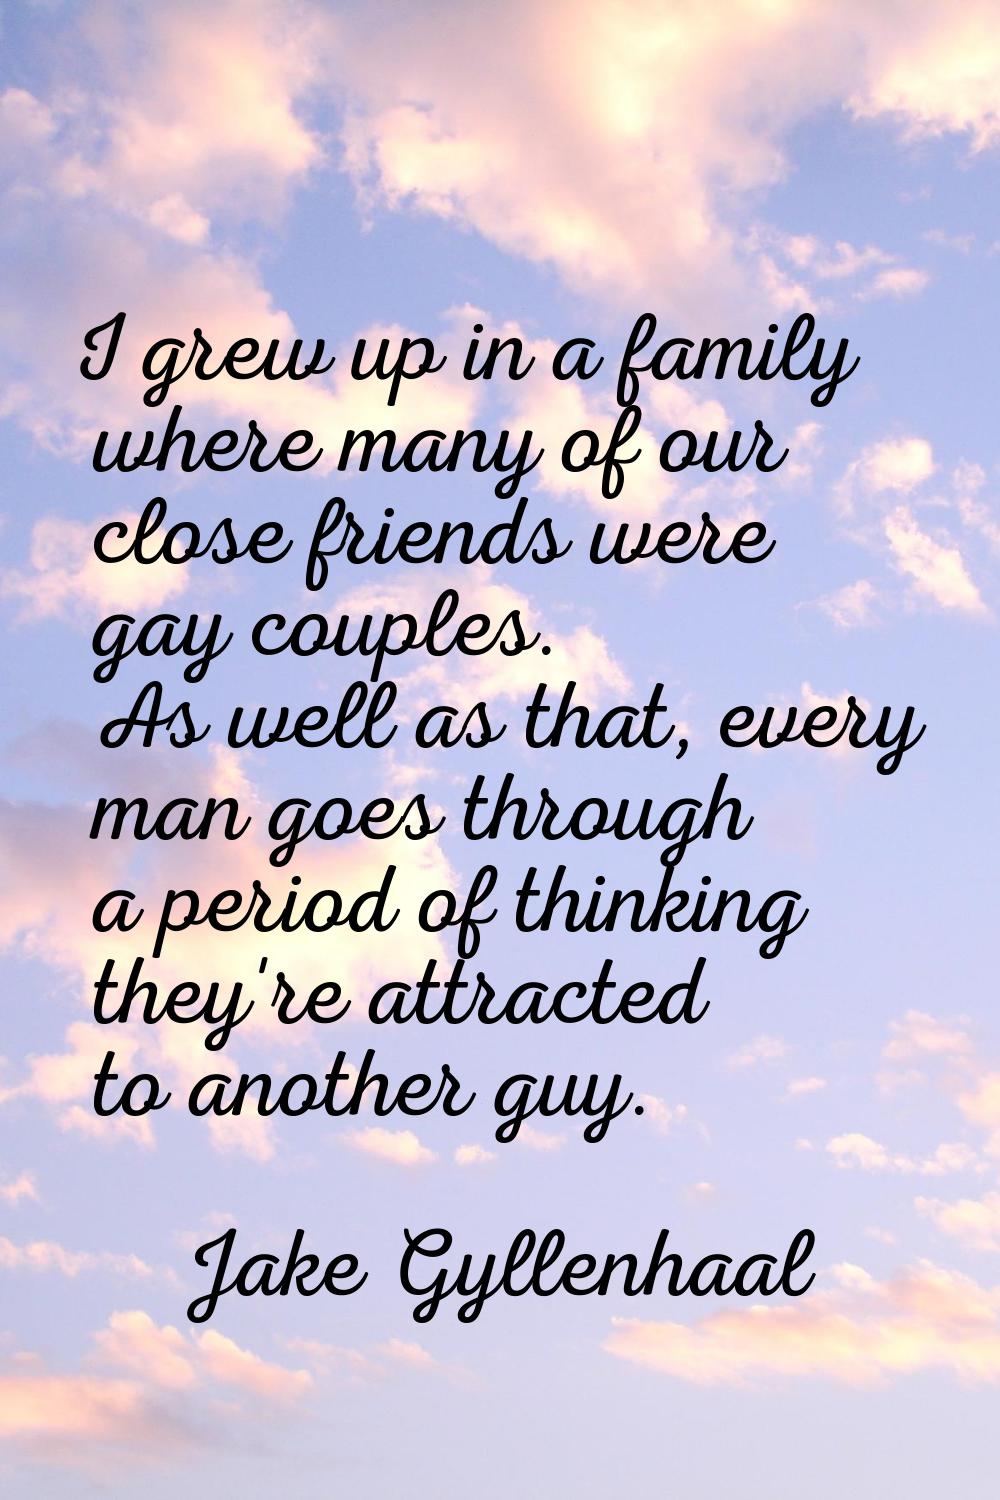 I grew up in a family where many of our close friends were gay couples. As well as that, every man 